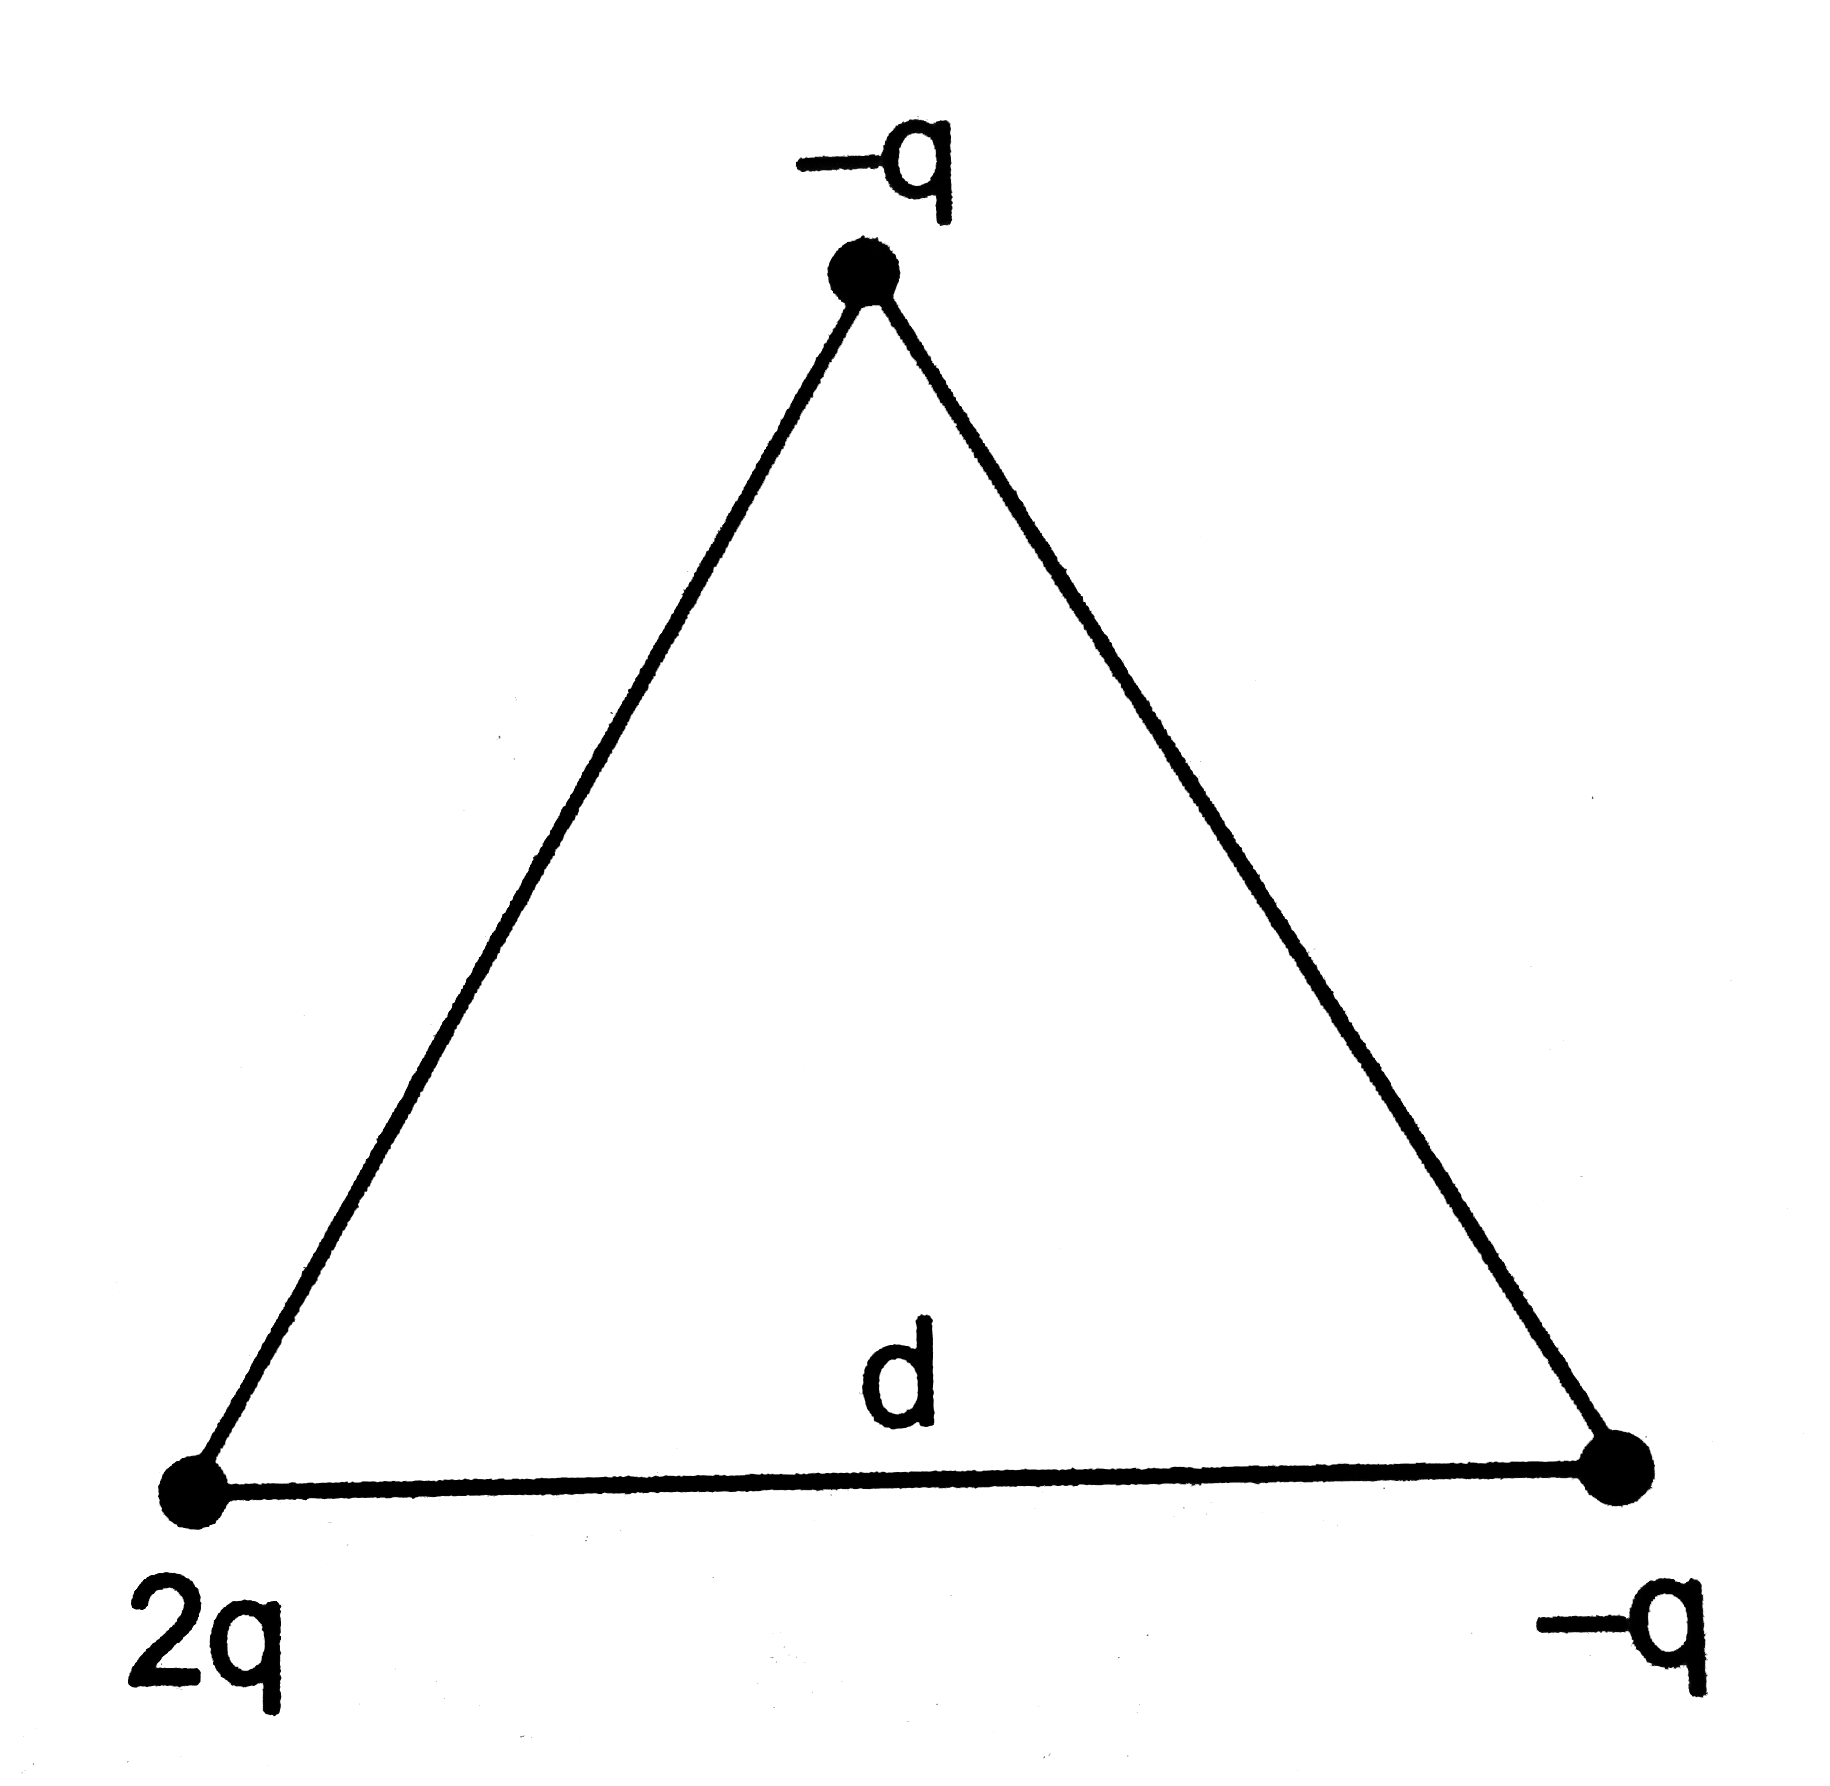 Three charges are arranged on the vertices of an equilateral triangle as shown in figure (29.E6) find the dipole moment of the combination.